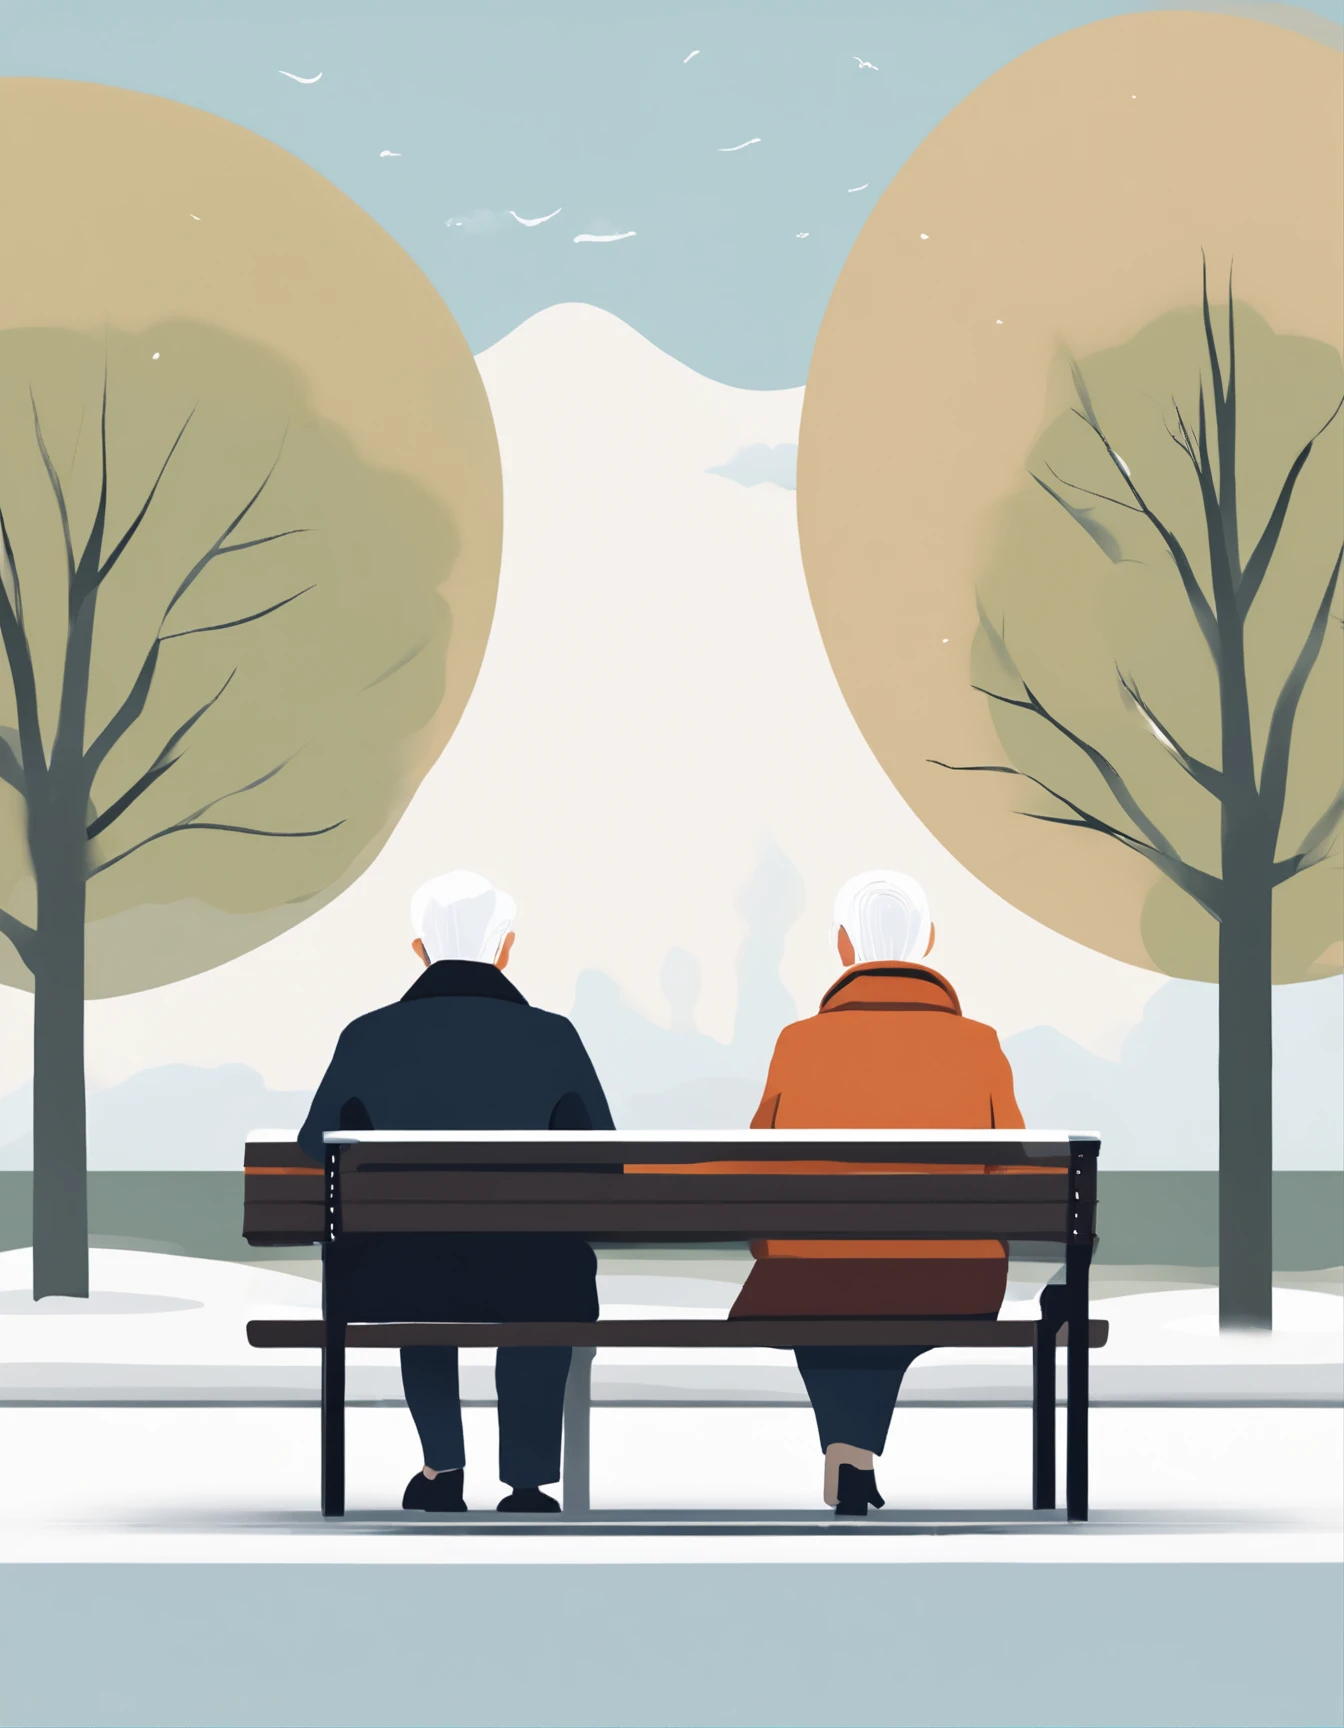 Use circles and lines to draw illustrations，An elderly couple sitting on a park bench in winter, Create using minimalist form